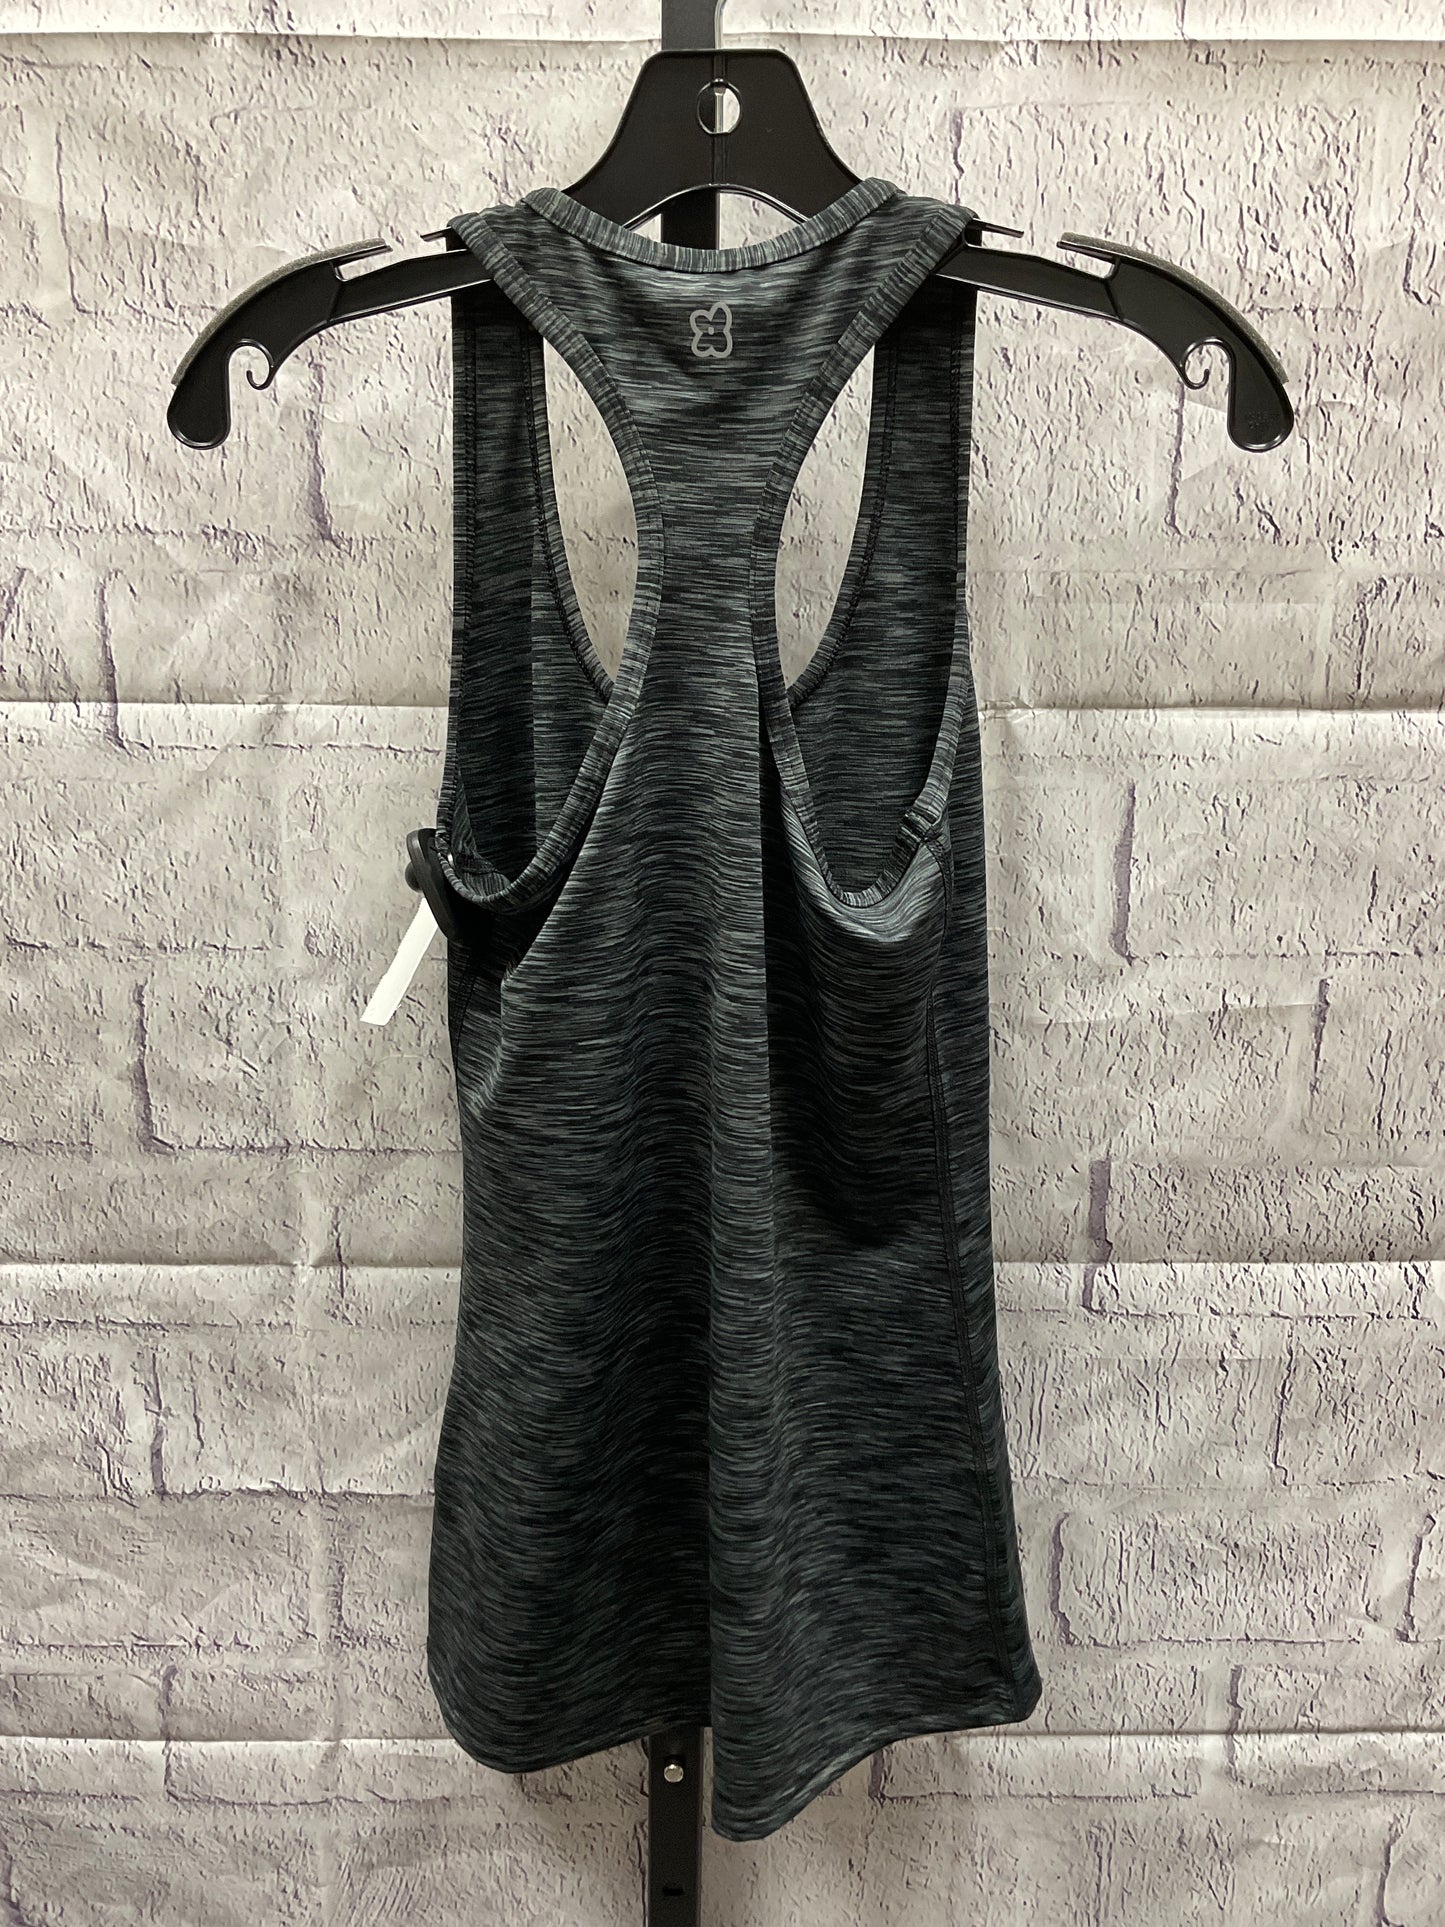 Athletic Tank Top By Clothes Mentor  Size: S